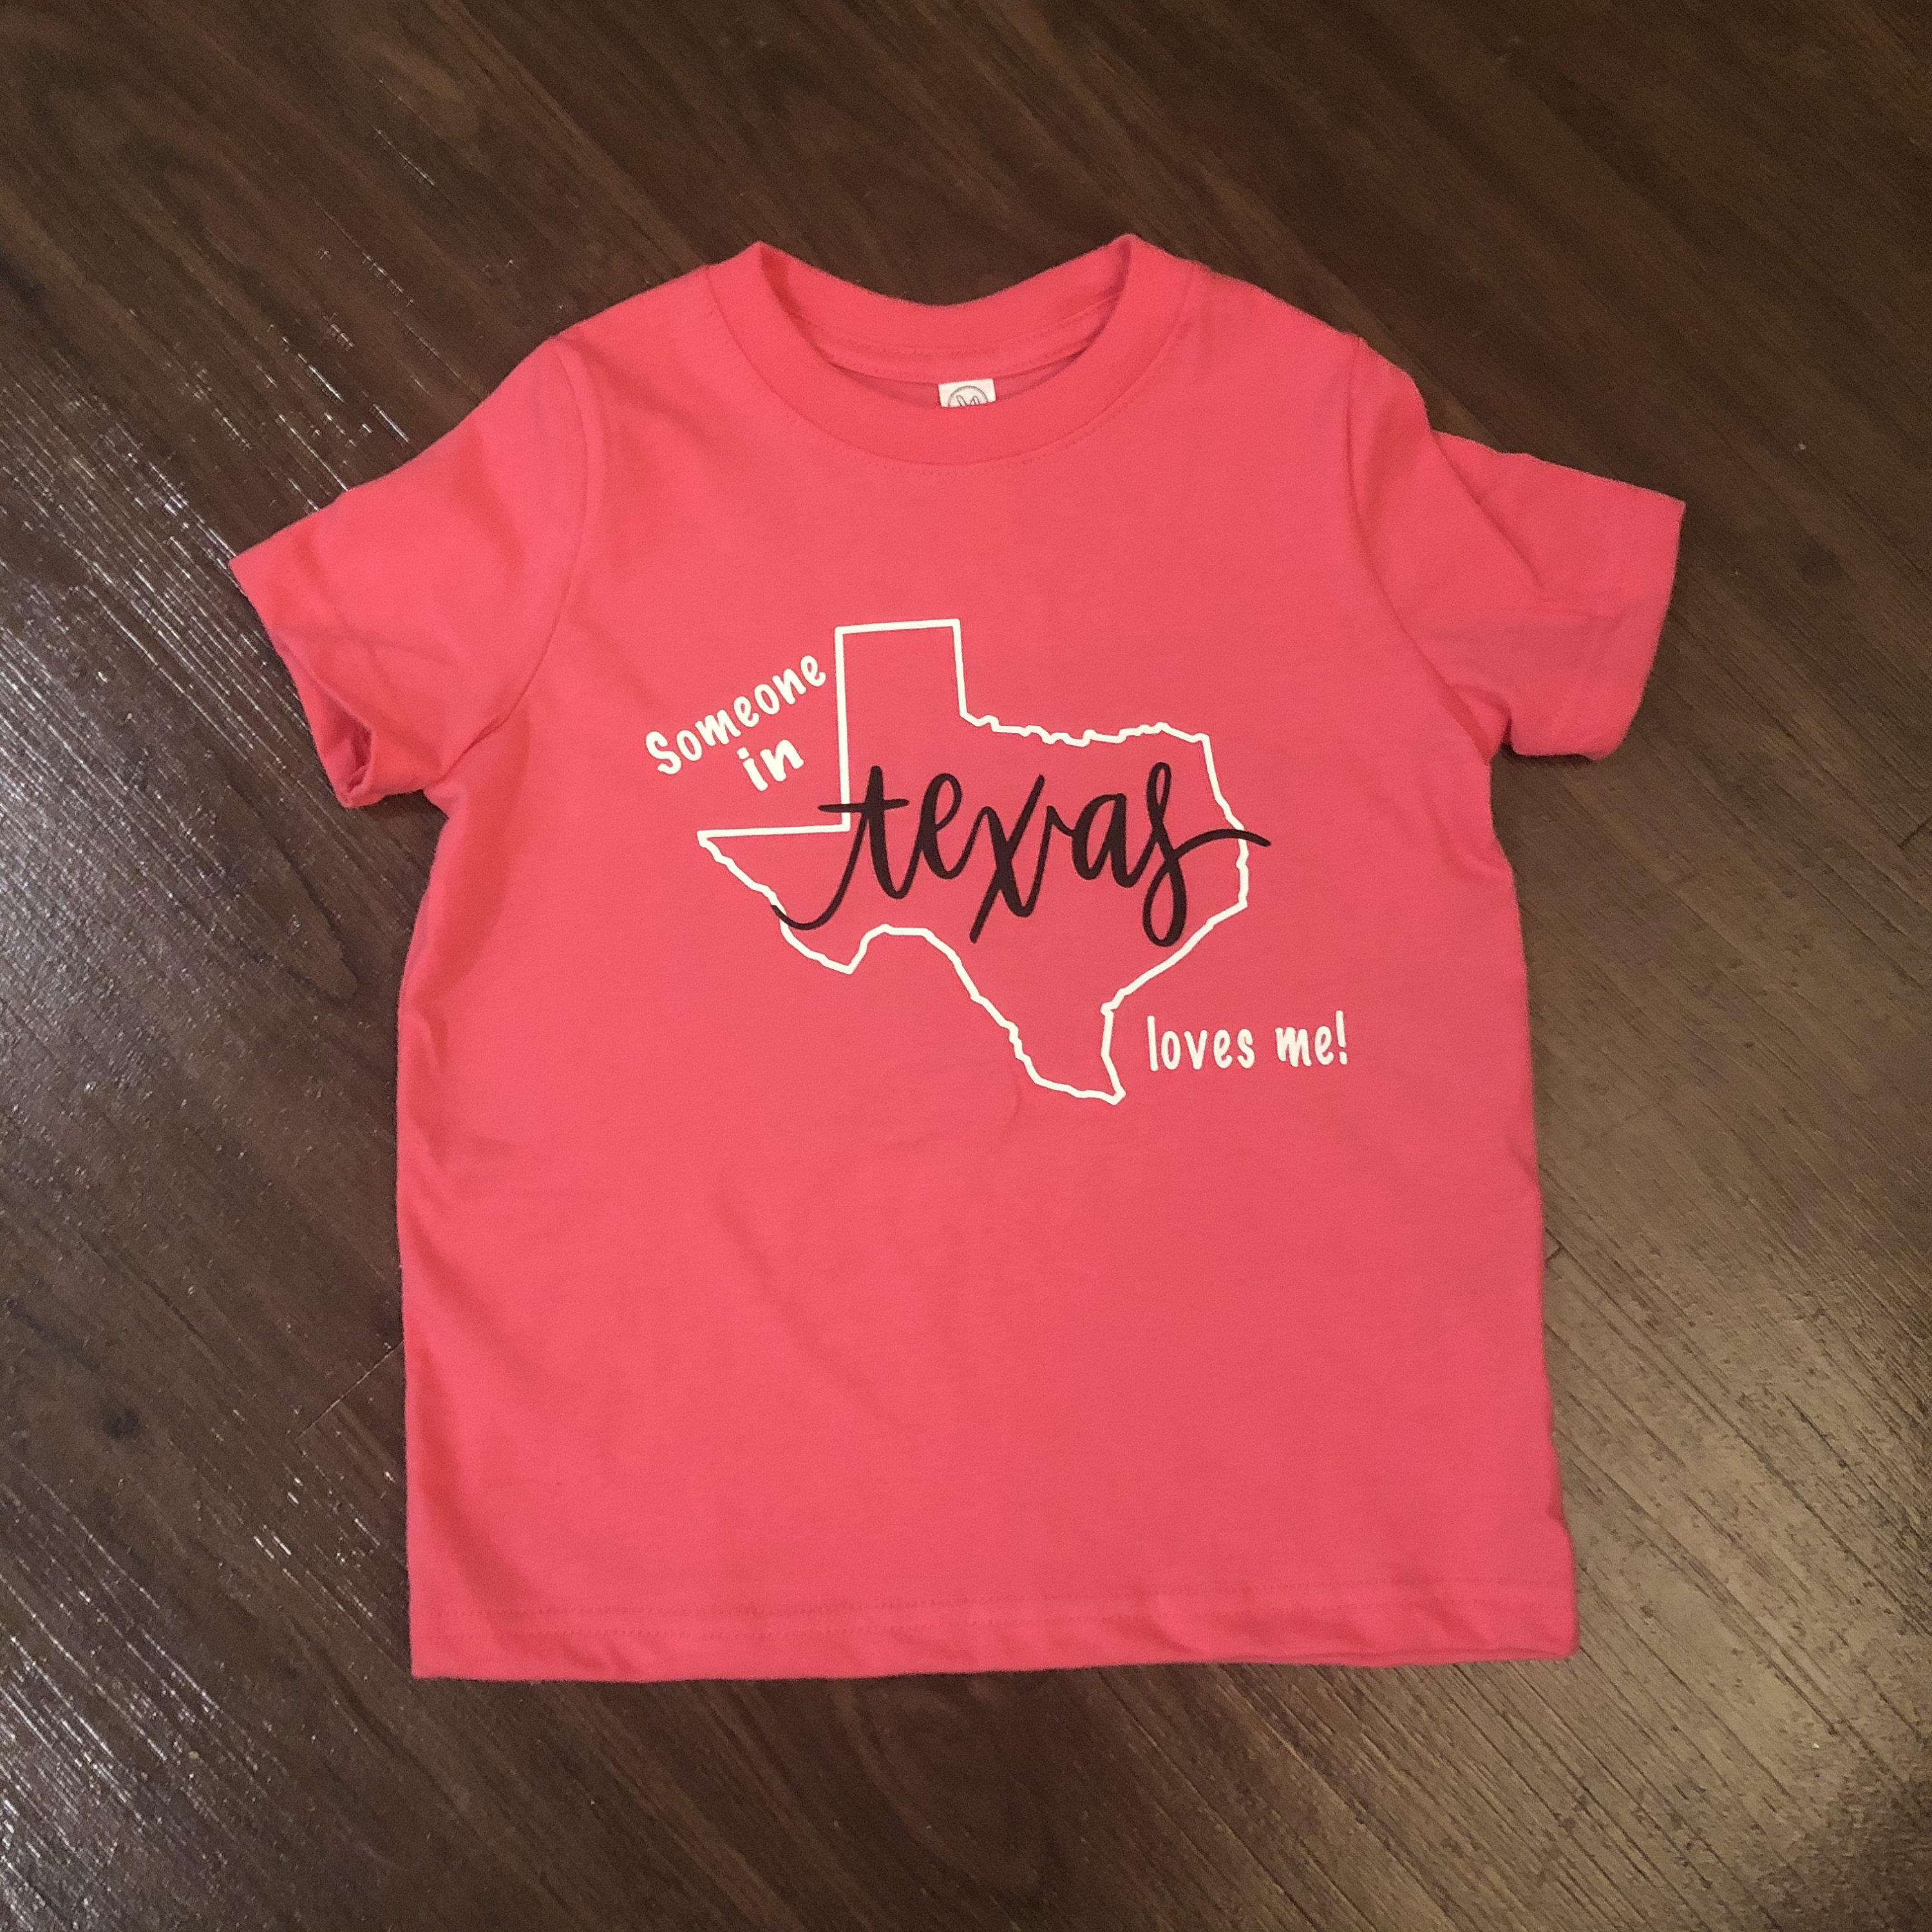 Toddler Someone in Texas loves me T-shirt | Etsy